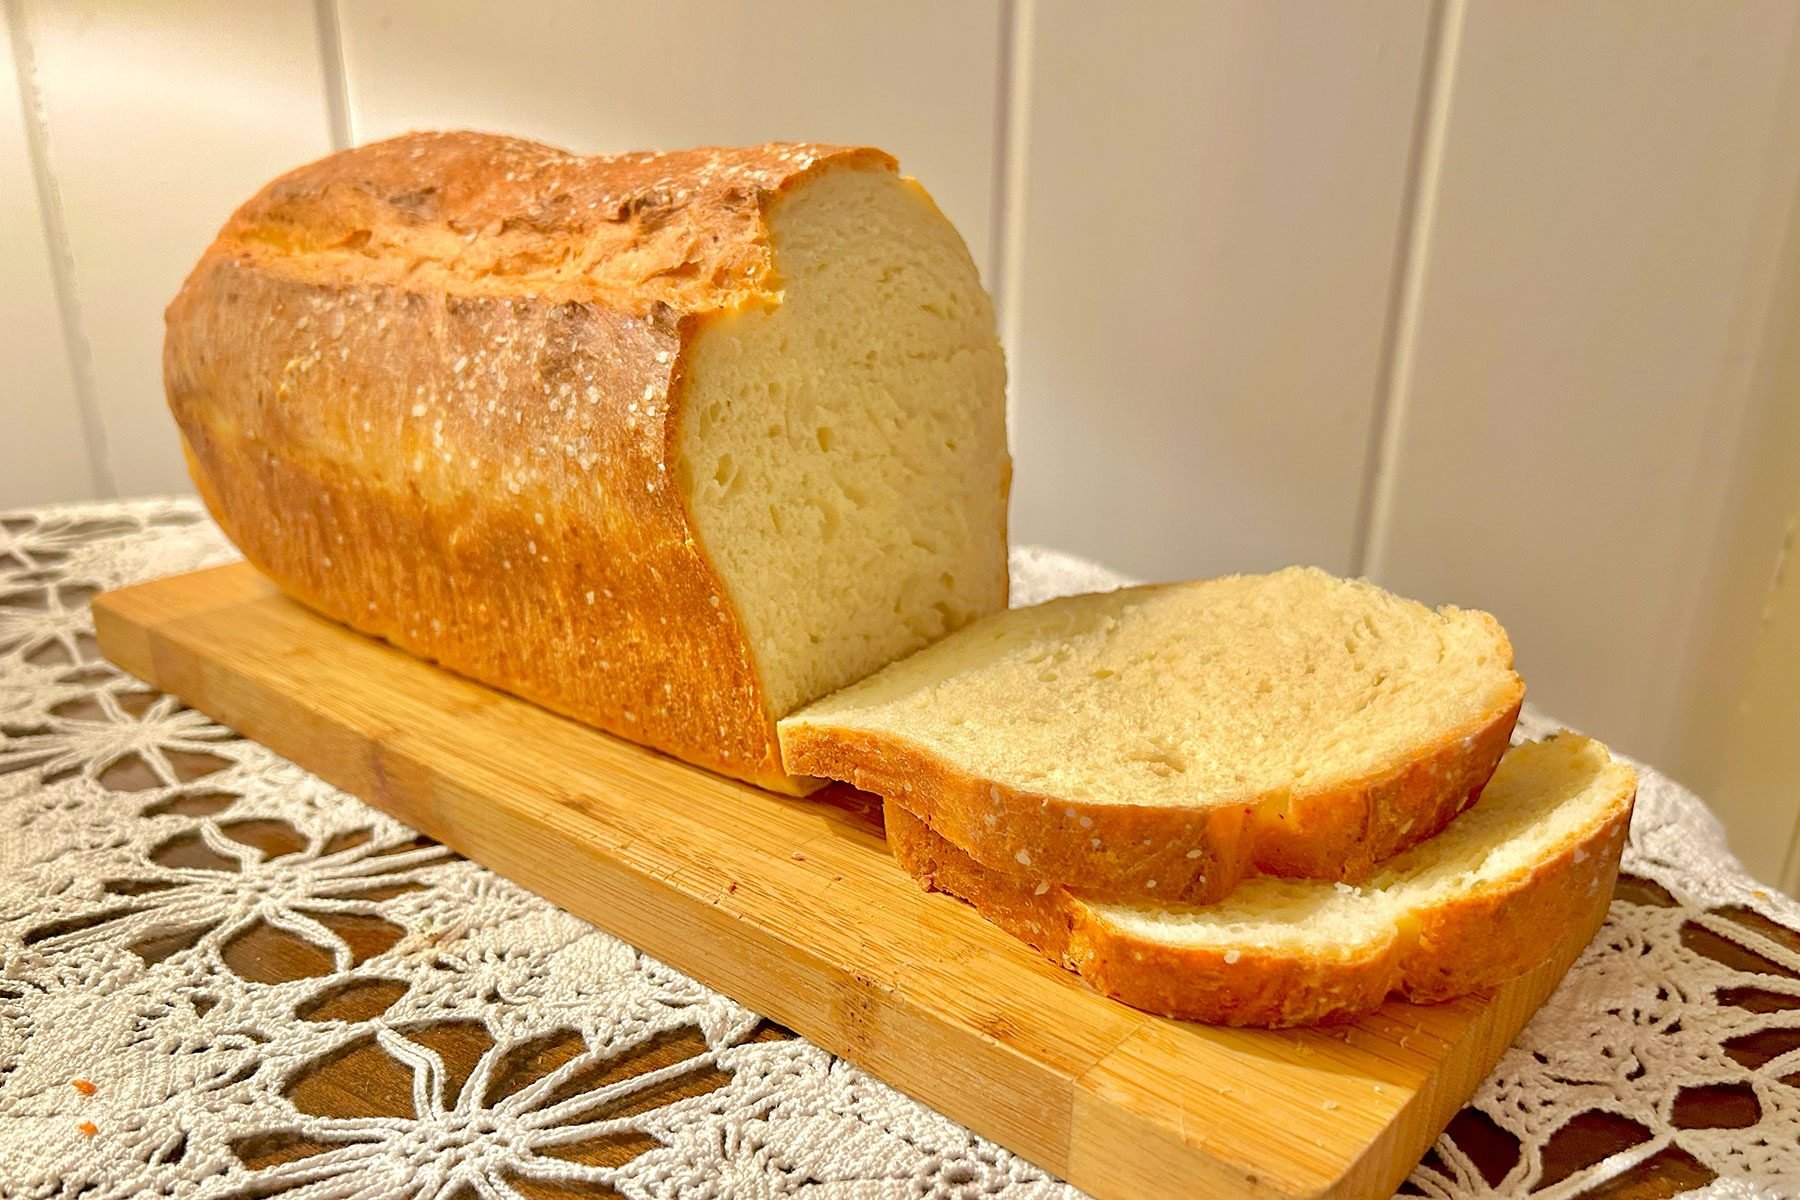 This Popular Cottage Cheese Bread Is Absolutely Delightful—and Easy To Make